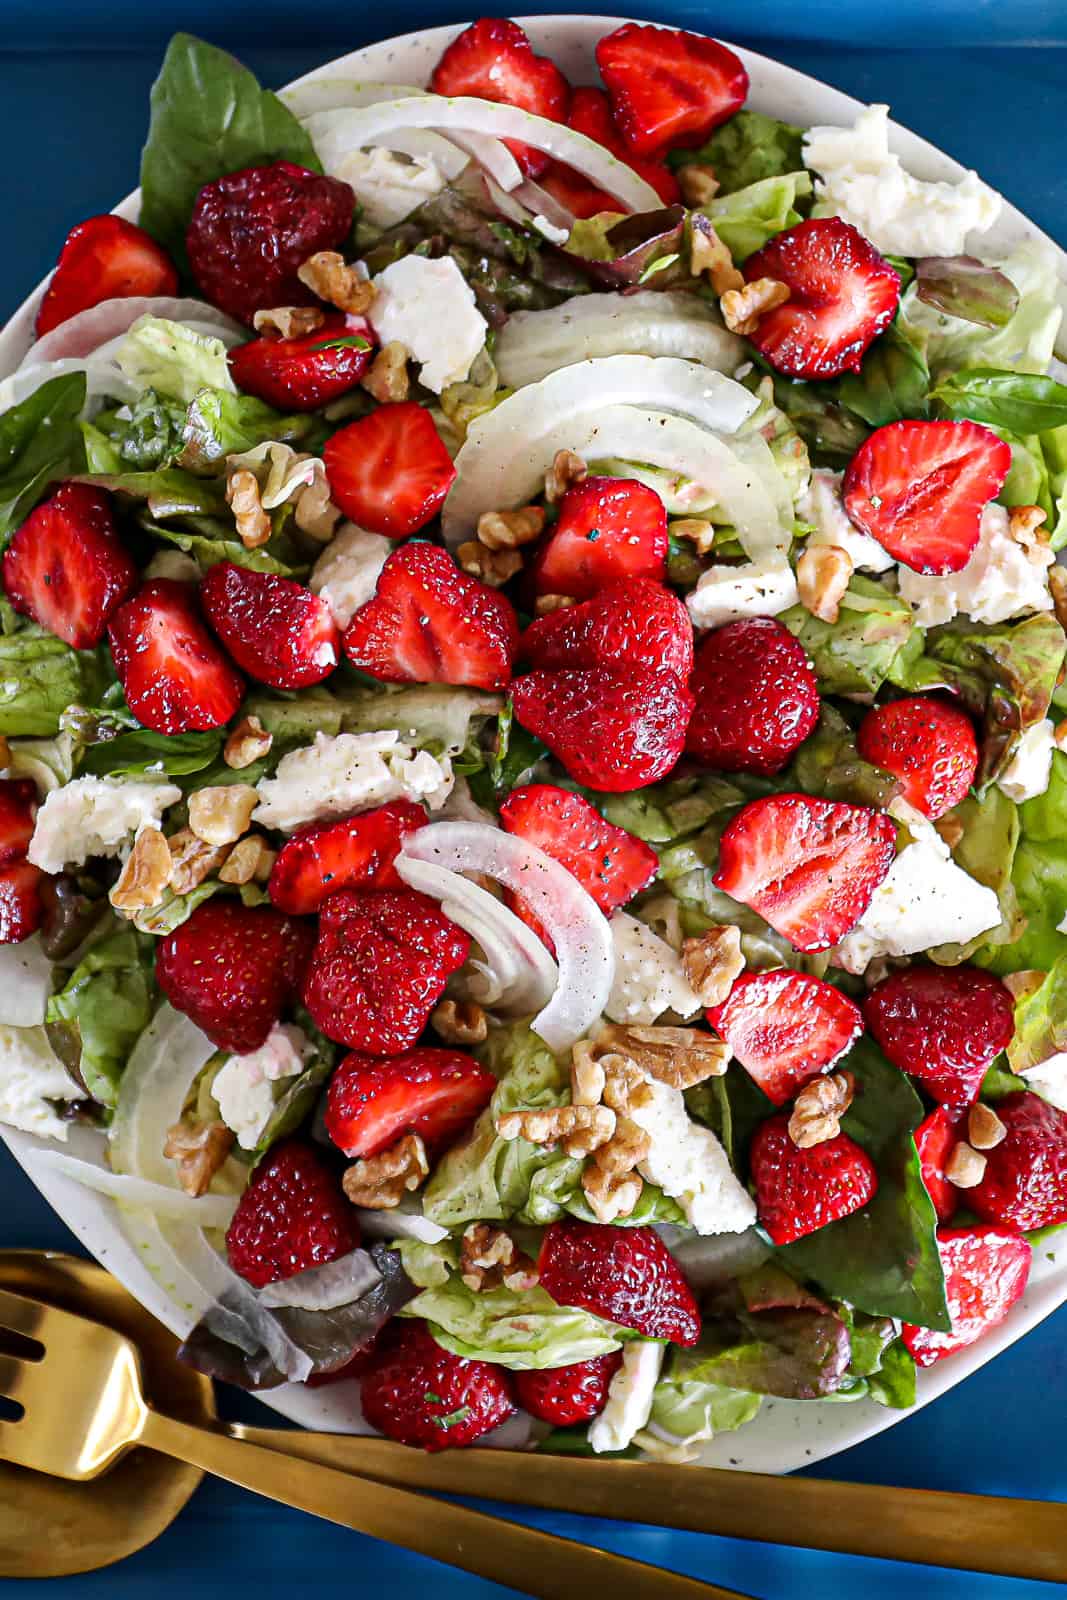 Spring Salad Recipe With Fruit Walnuts and Basil Dressing